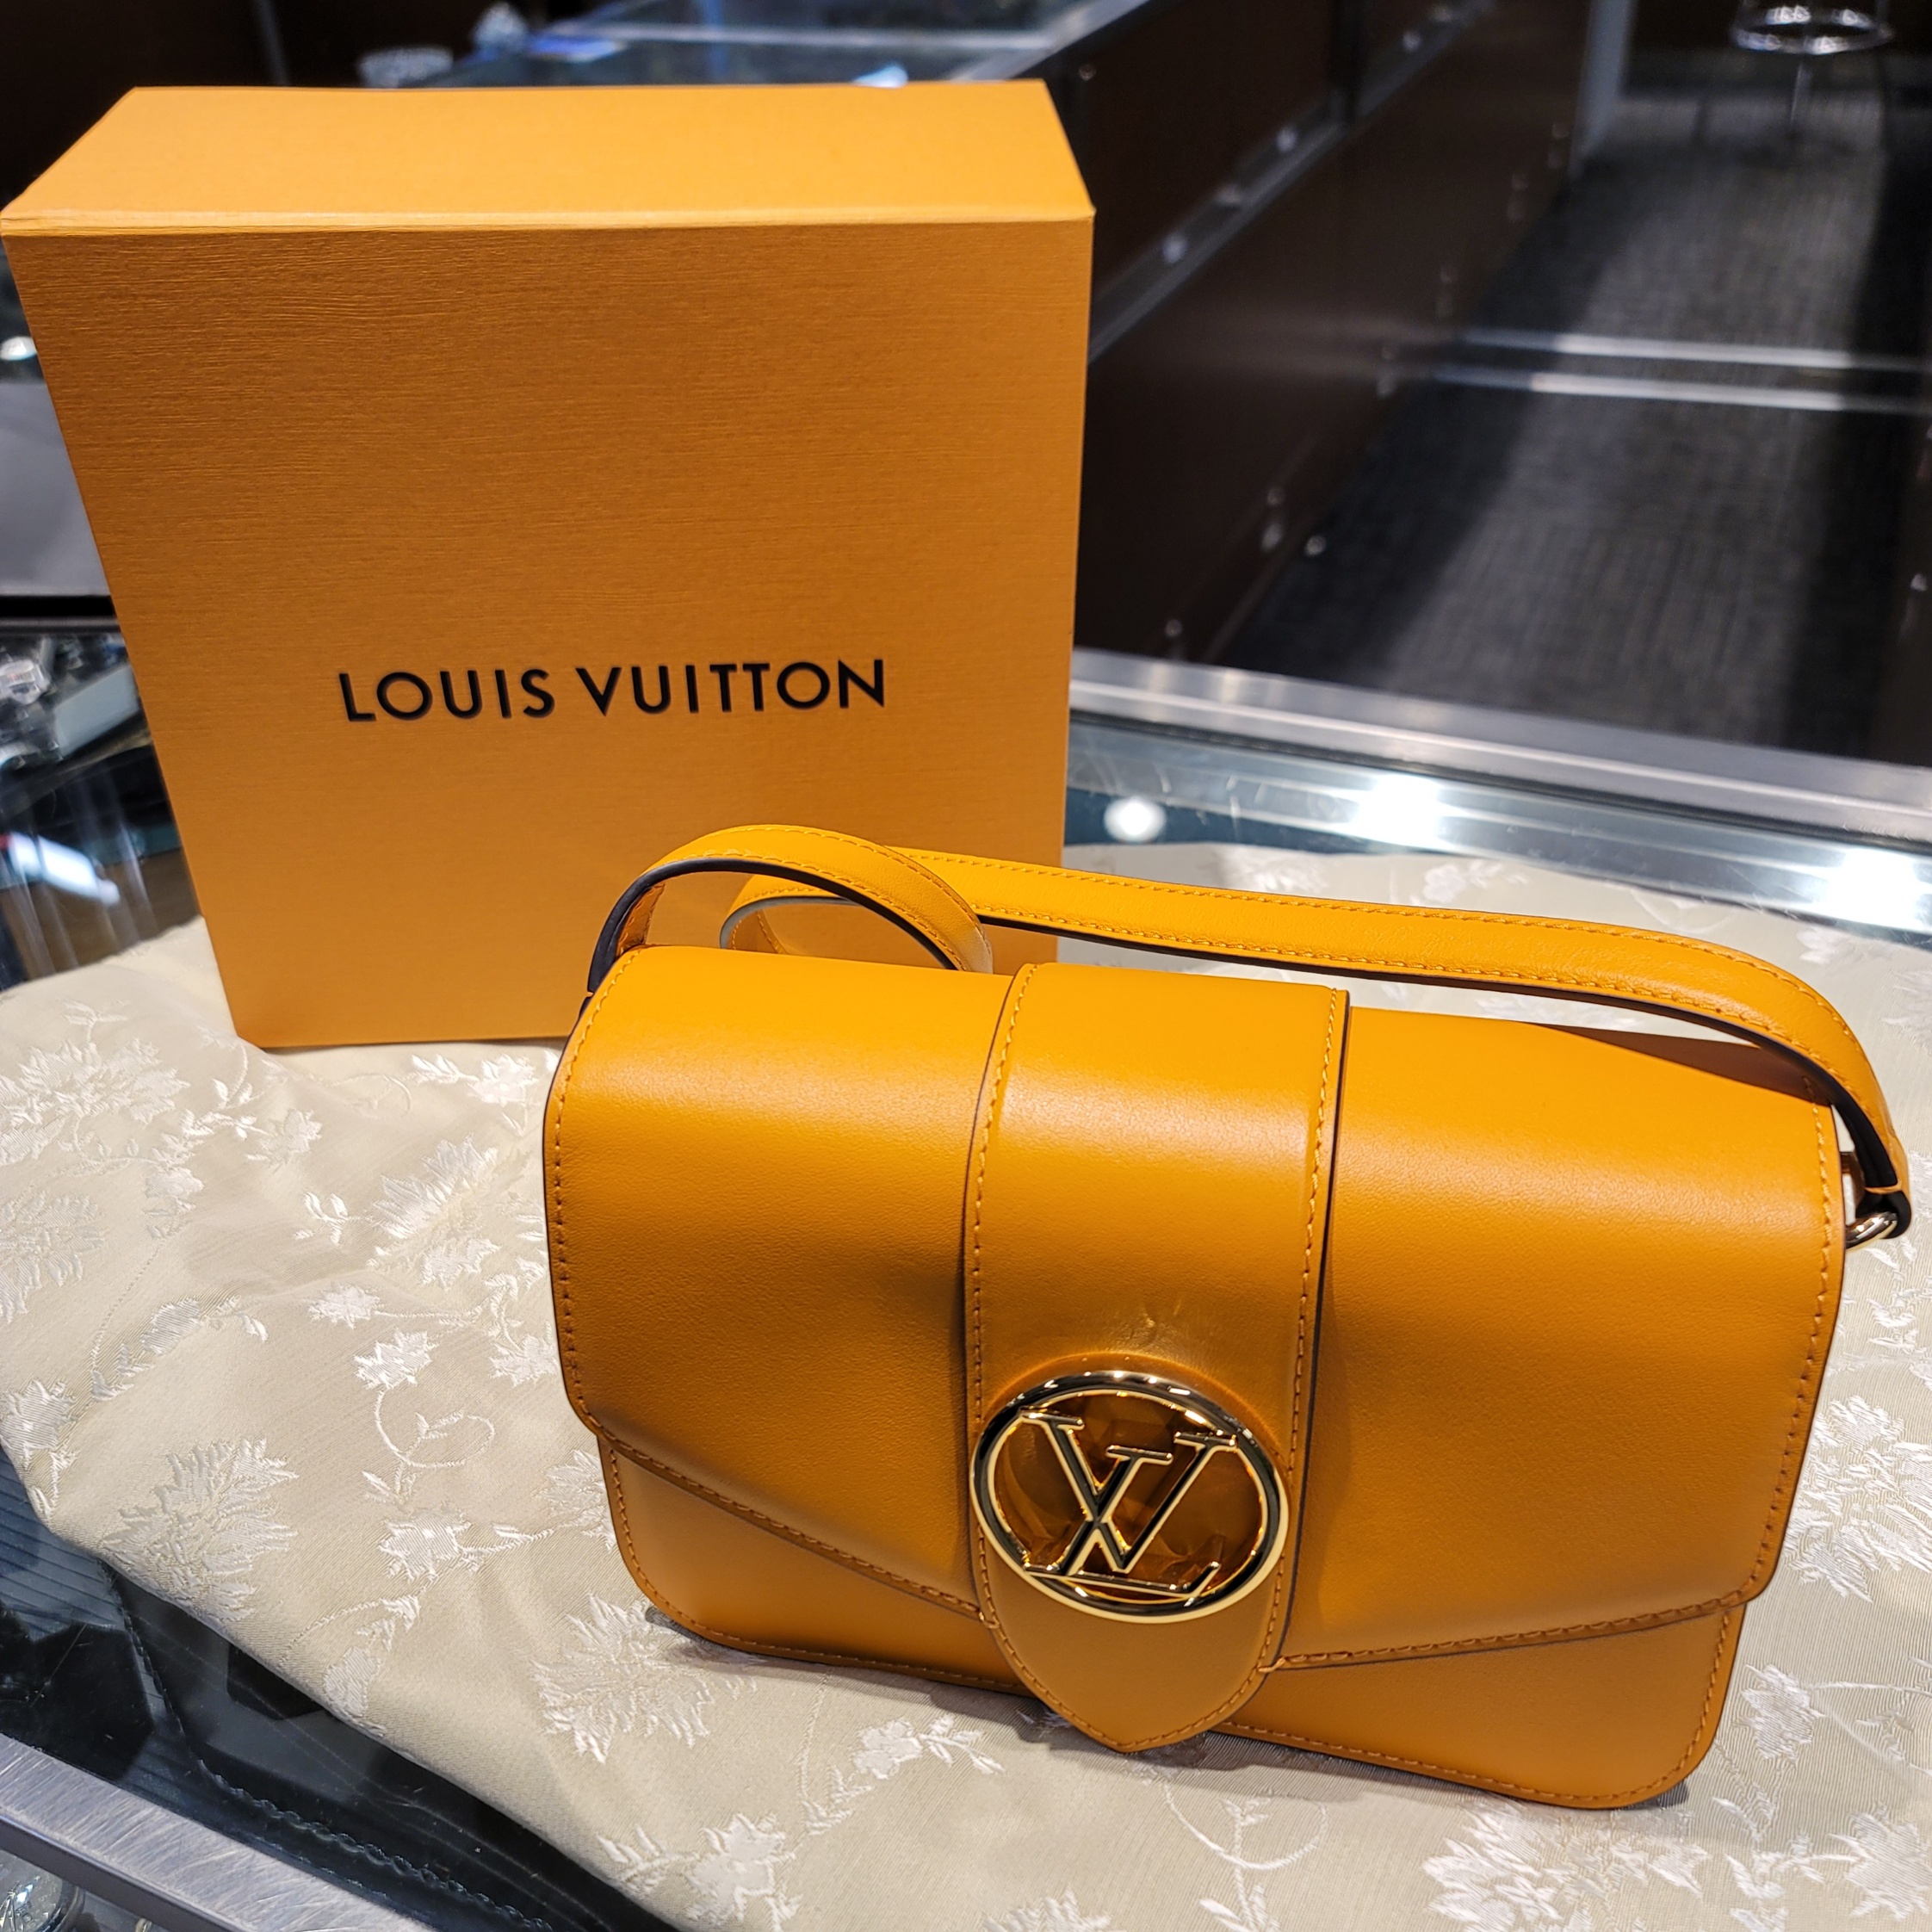 UPDATED! Louis Vuitton Bags You Should Never Buy! Worst LV Bags